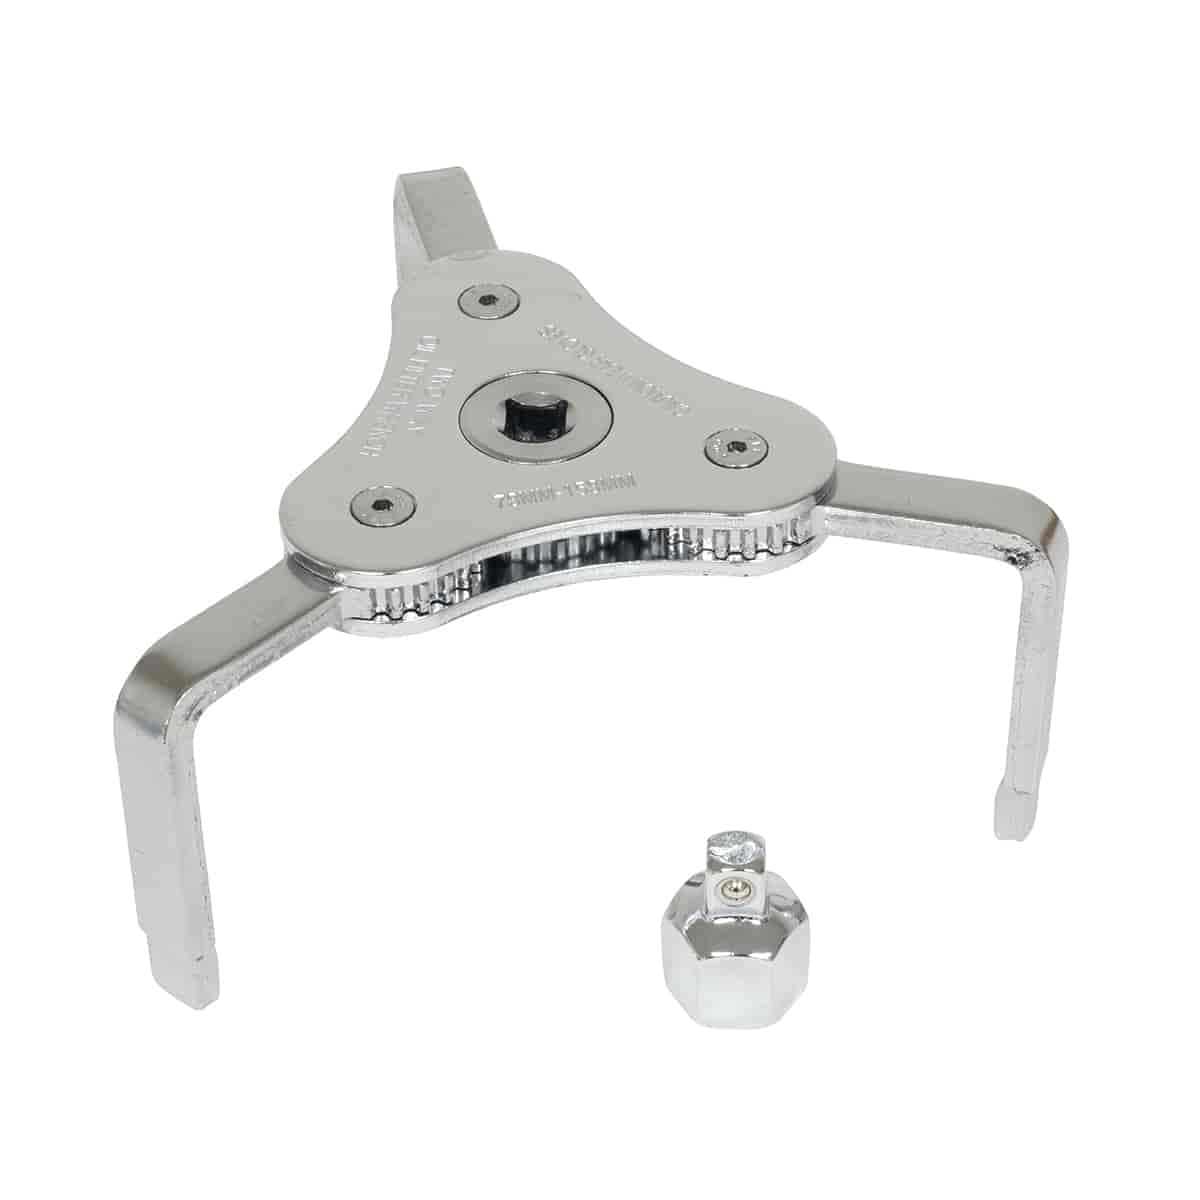 3-Jaw Oil Filter Wrench w/ Adapter